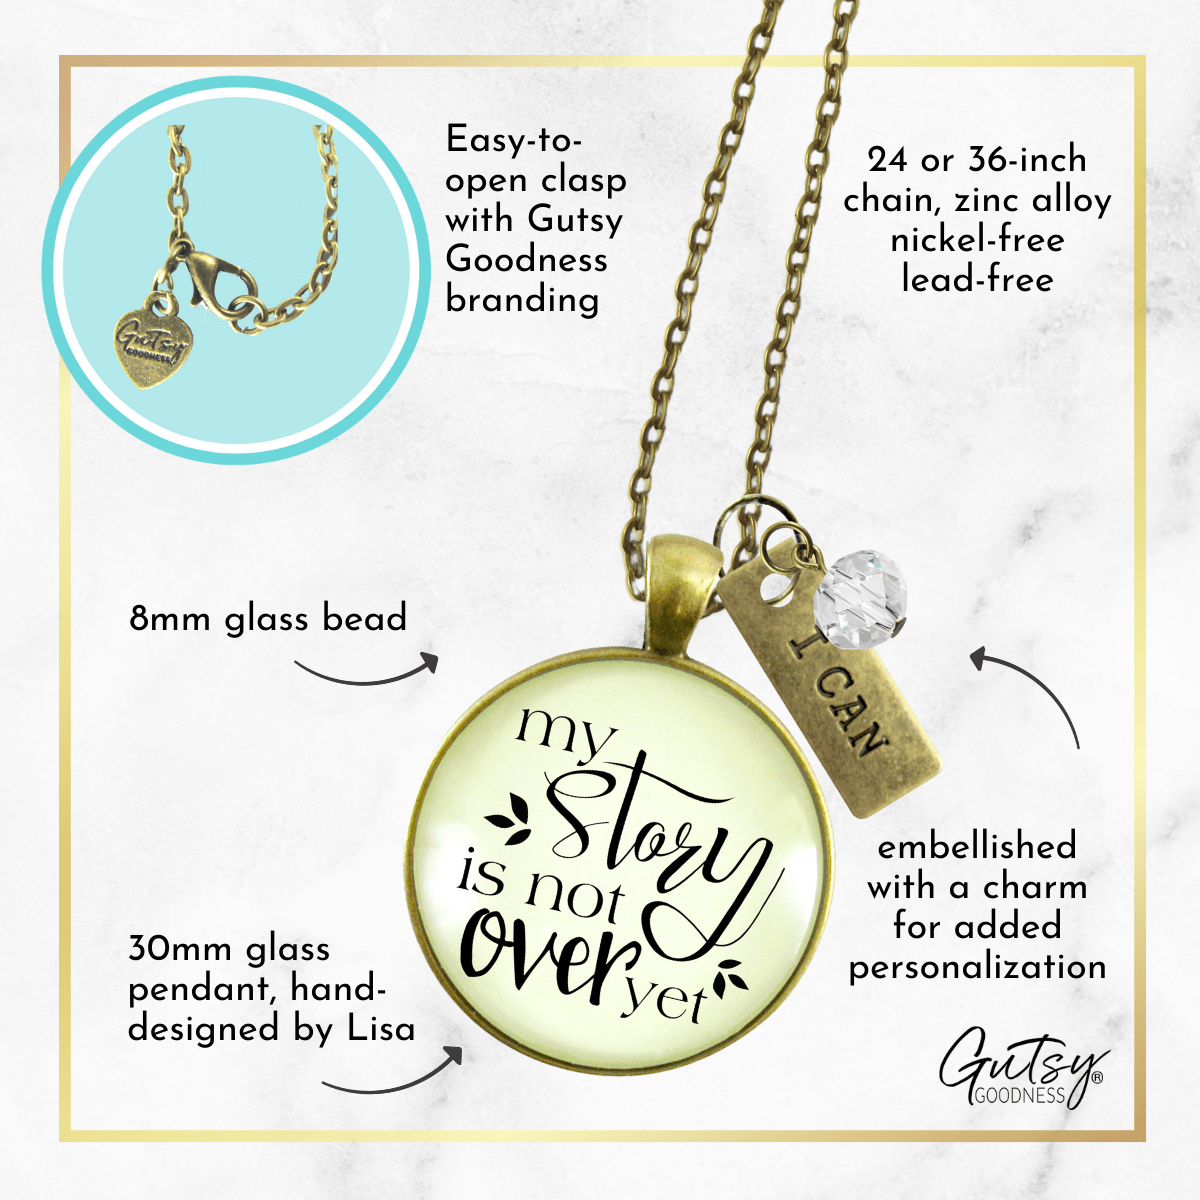 Gutsy Goodness My Story Isn't Over Yet Necklace Survivor Saying Warrior Jewelry Gift - Gutsy Goodness Handmade Jewelry;My Story Isn't Over Yet Necklace Survivor Saying Warrior Jewelry Gift - Gutsy Goodness Handmade Jewelry Gifts